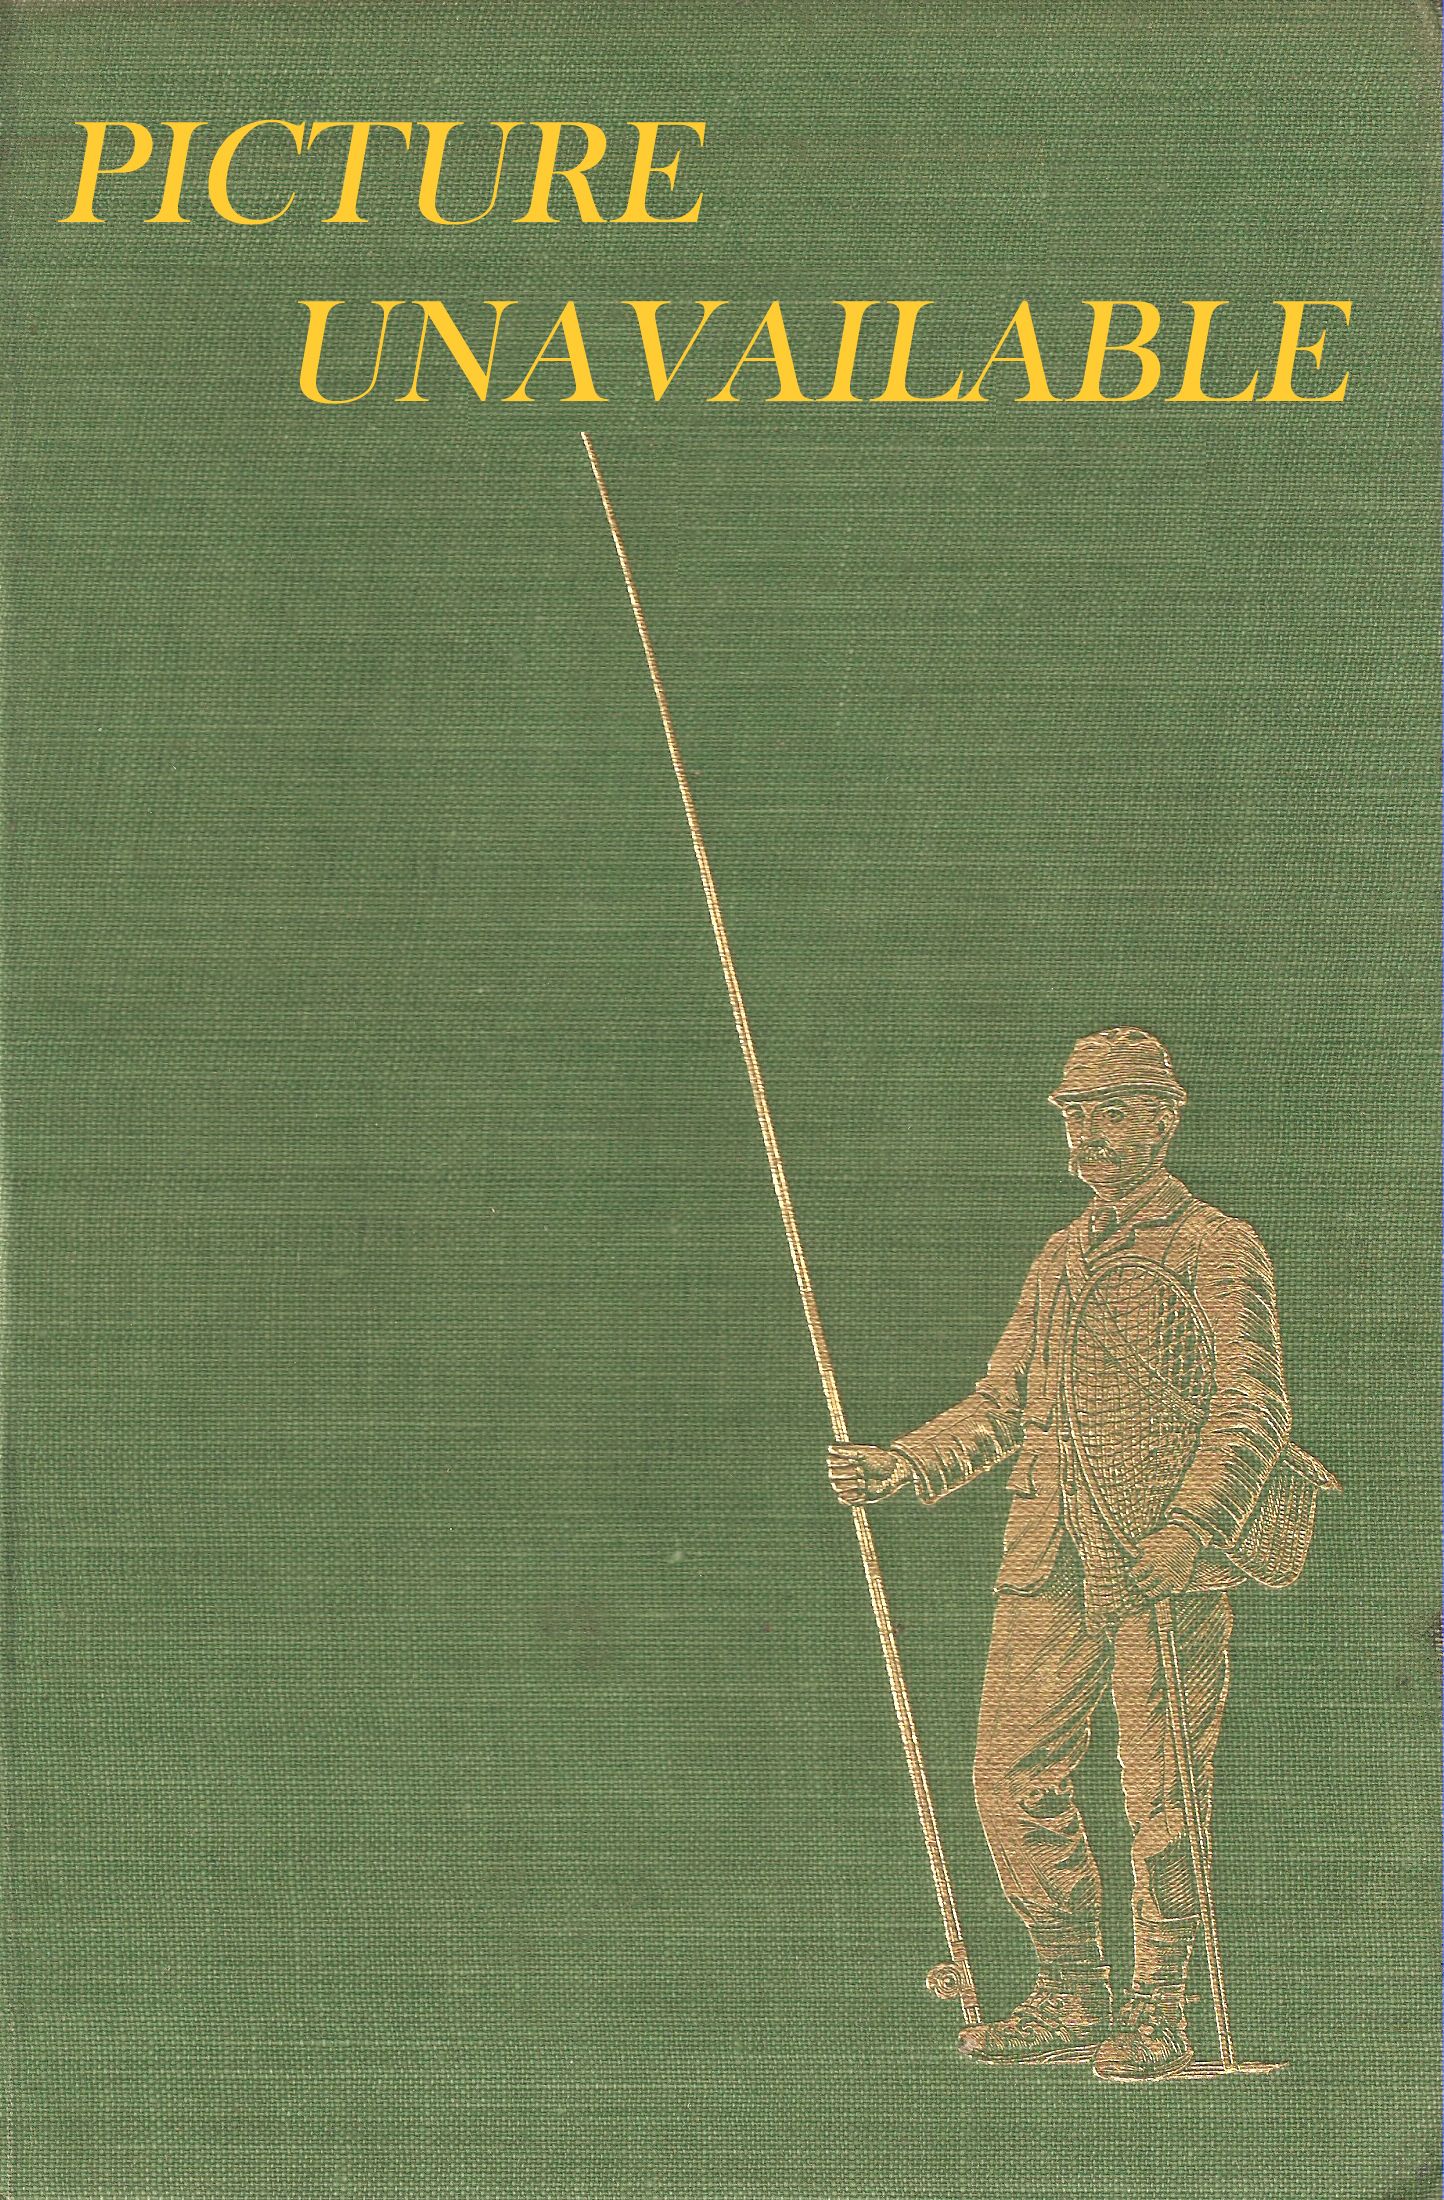 THE INCOMPLEAT ANGLER: FISHING IZAAK WALTON'S FAVORITE RIVERS. By Robert G. Deindorfer. Foreword by Nick Lyons. Drawings by Dorothea von Elbe.